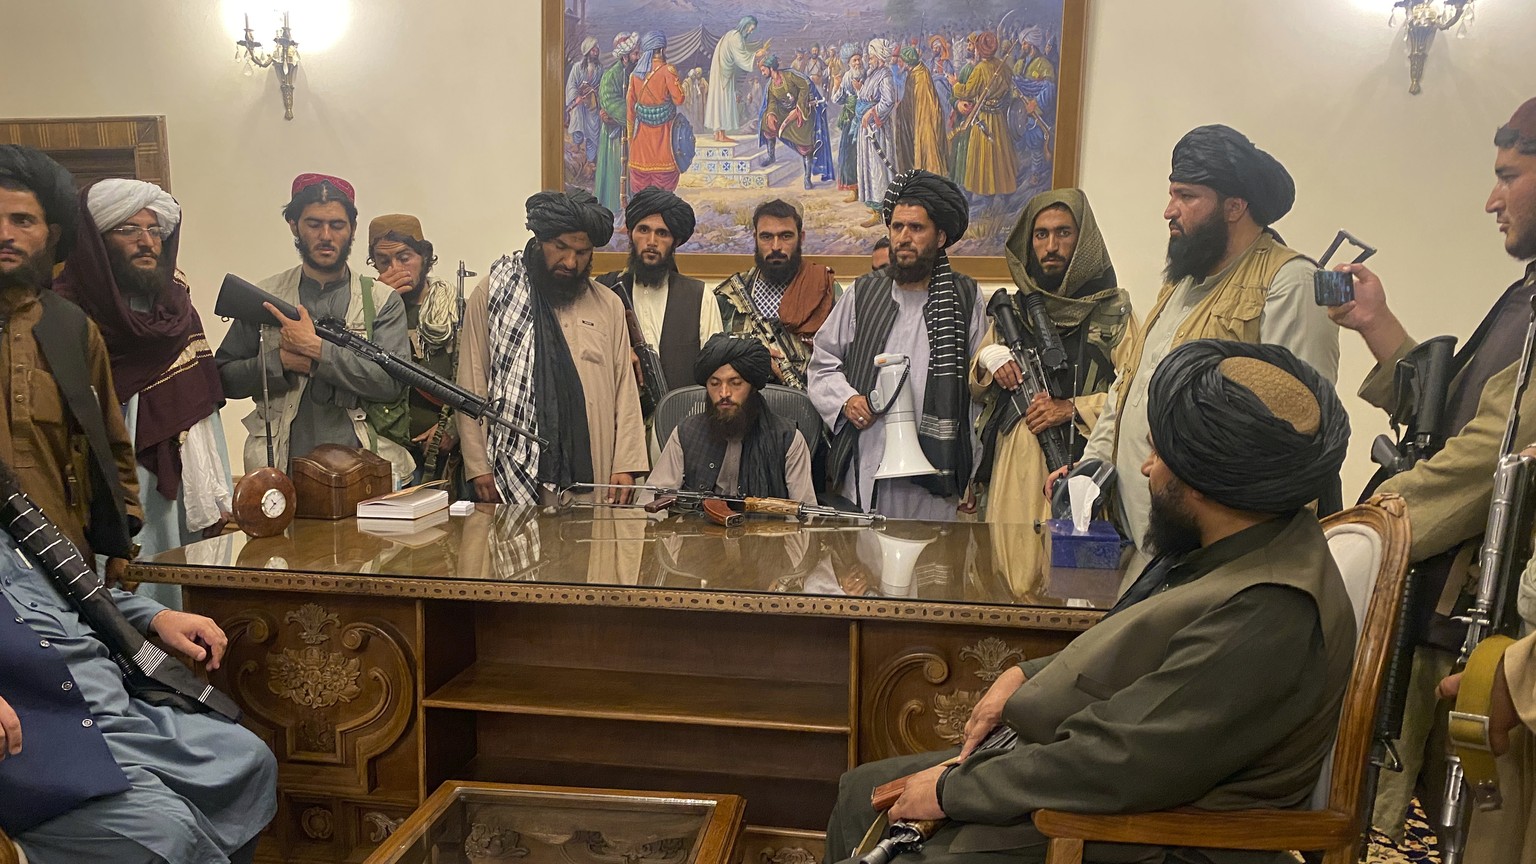 FILE - In this Aug. 15, 2021, file photo, Taliban fighters take control of the Afghan presidential palace in Kabul, Afghanistan, after President Ashraf Ghani fled the country. On the eve of the annive ...